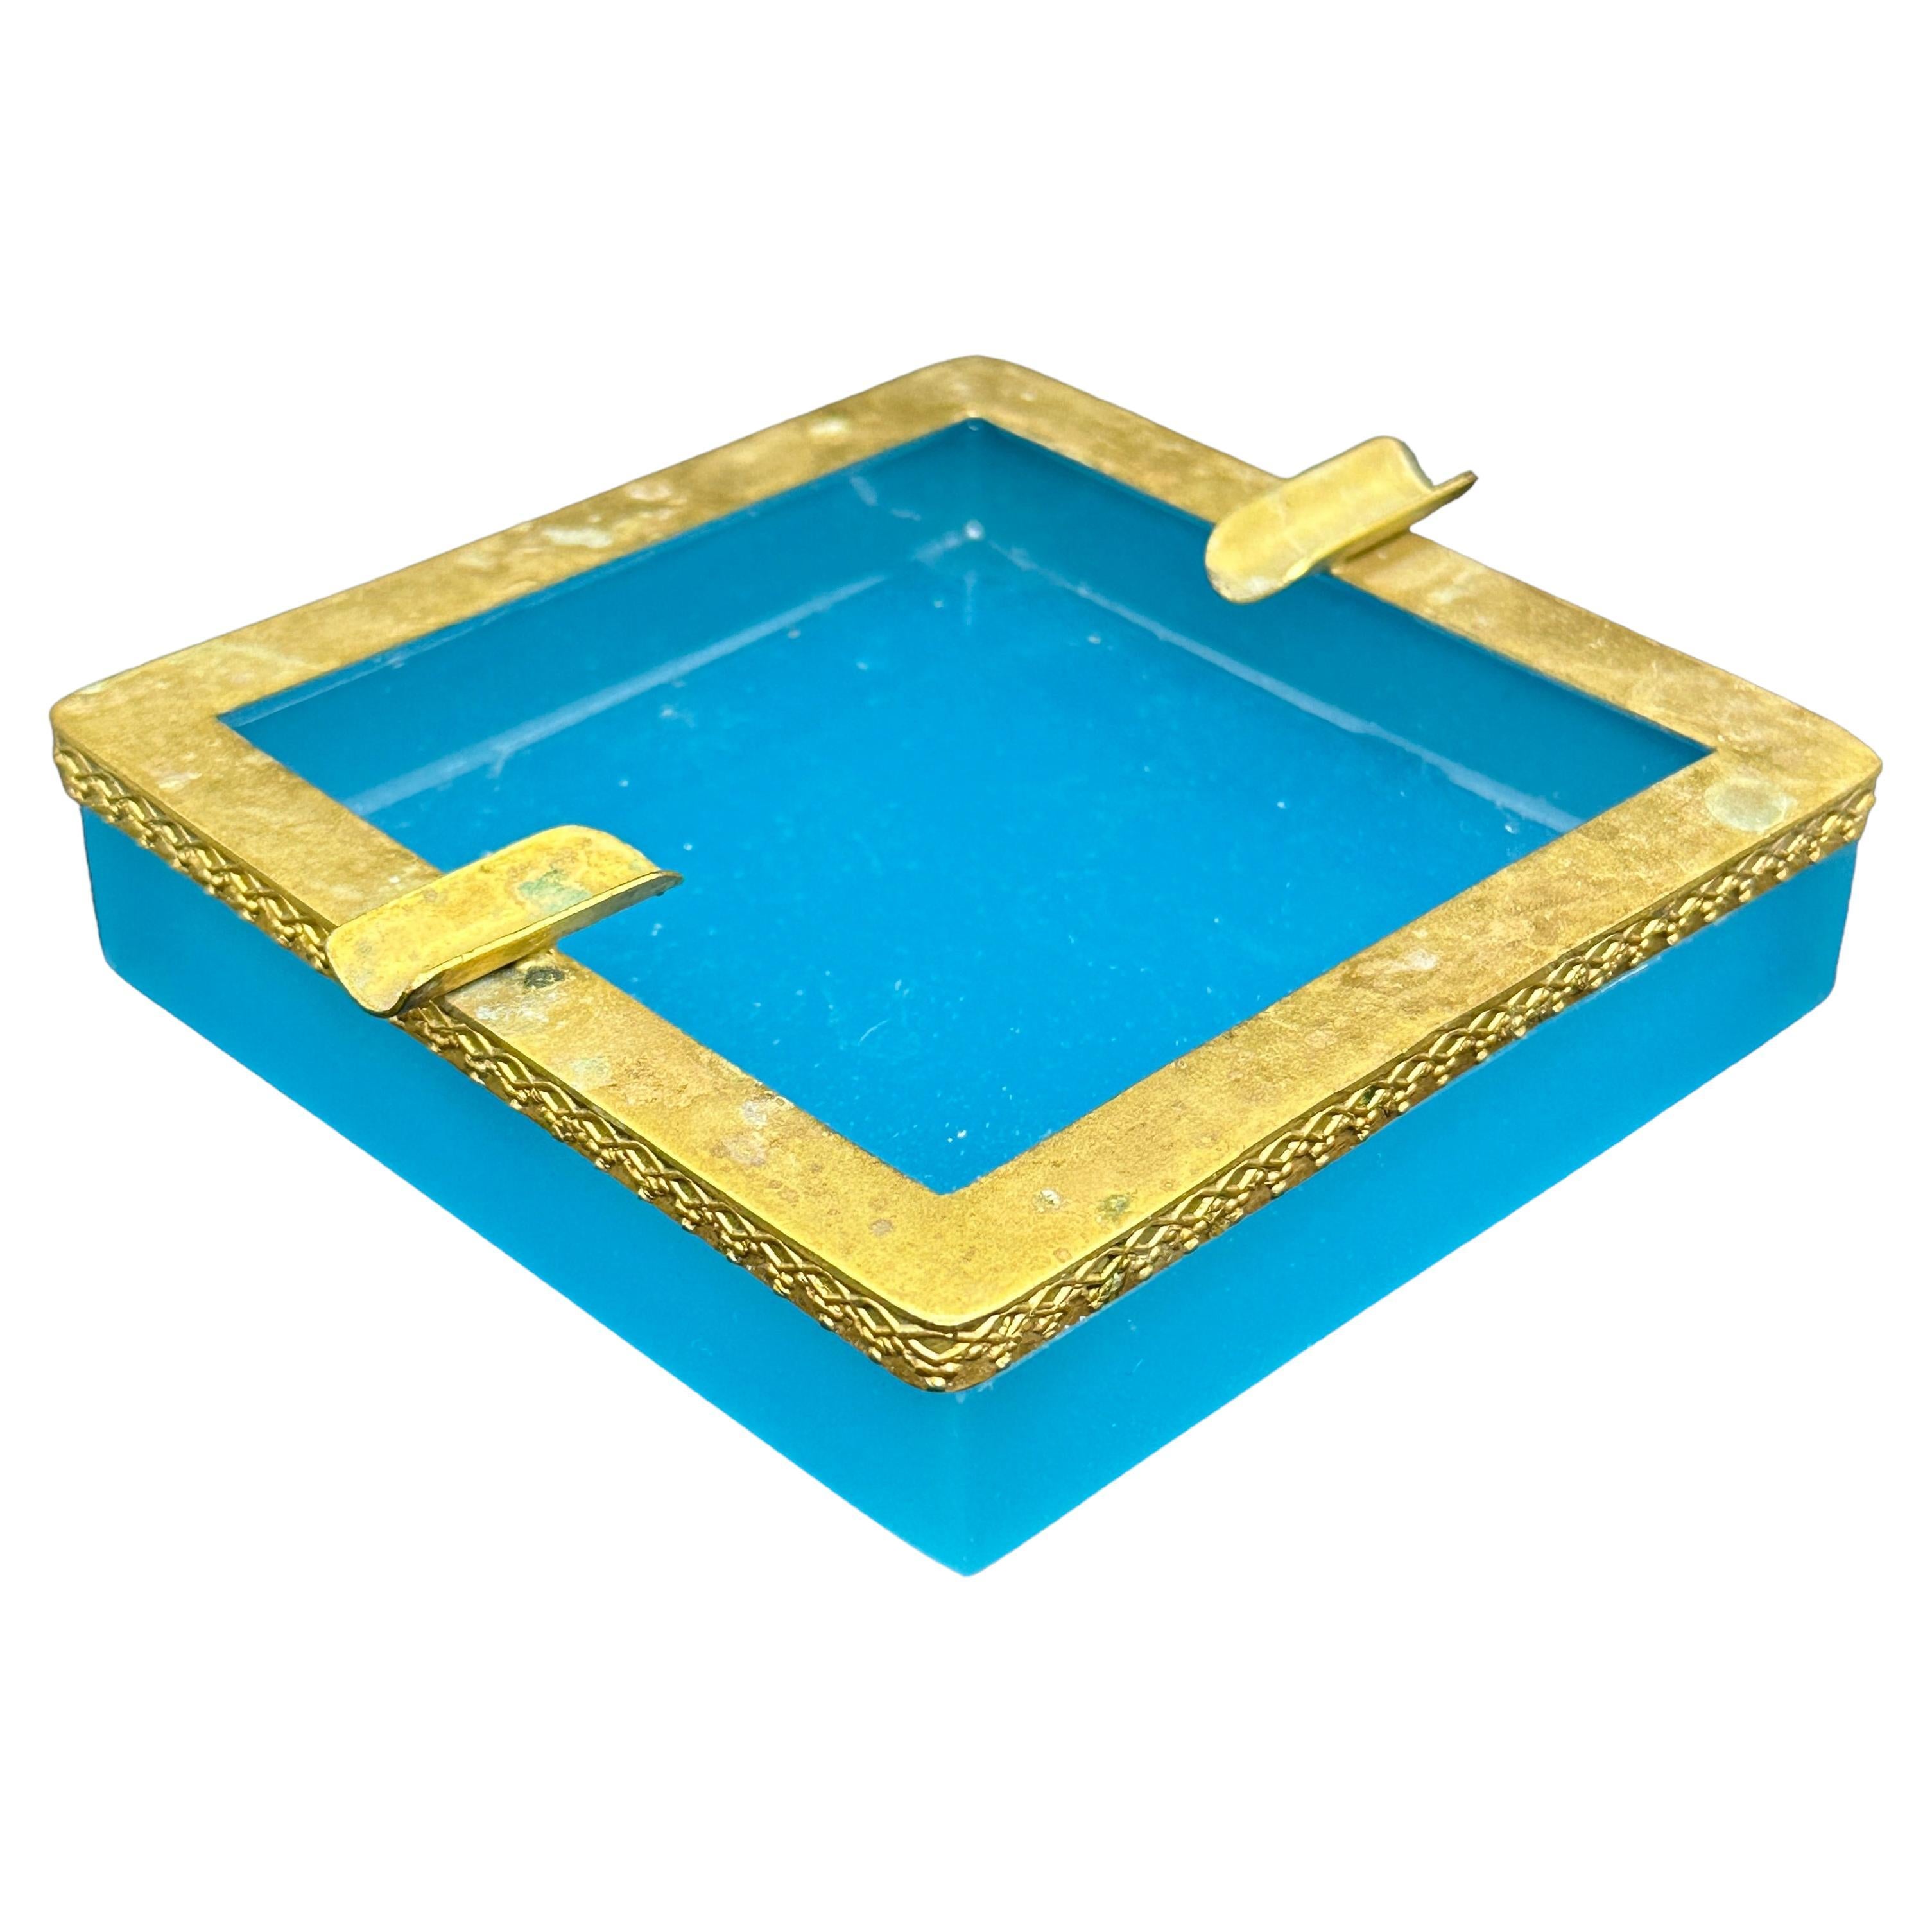 Turquoise Opaline Glass Ashtray with Bronze Mounts, France Italy Early 20th Cent